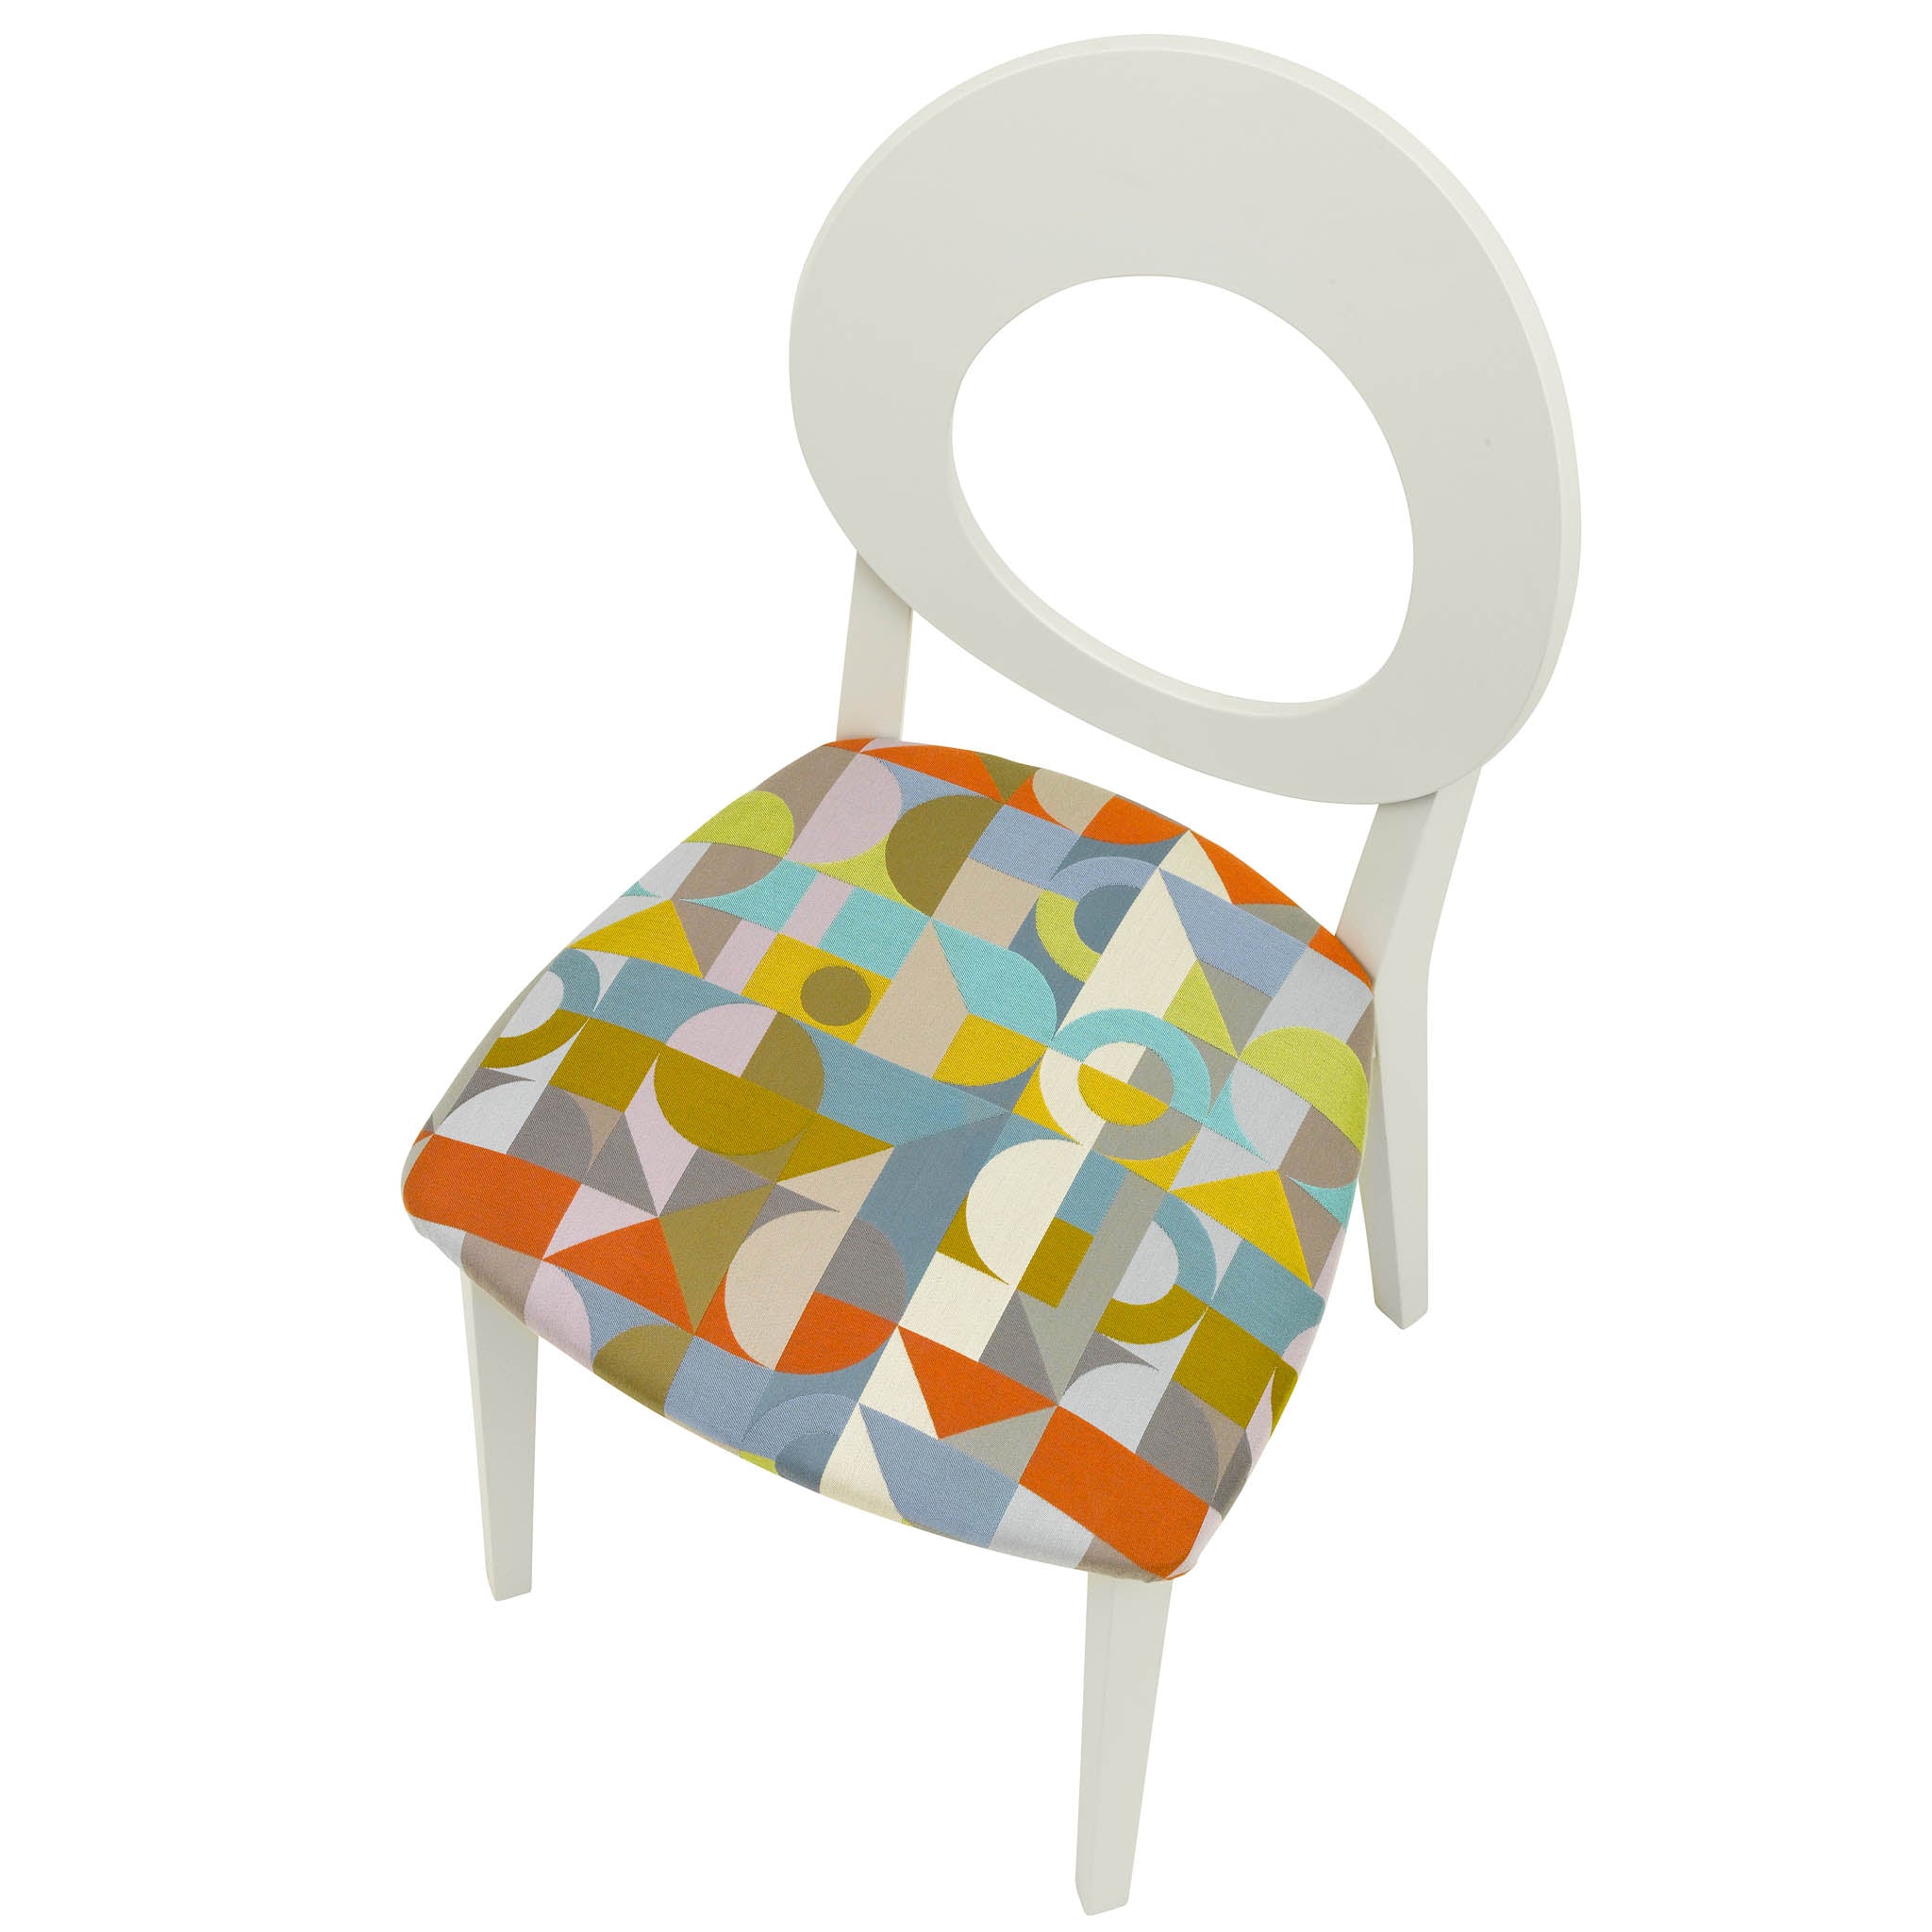 Chloe Dining Chair upholstered in Motown from Margo Selby